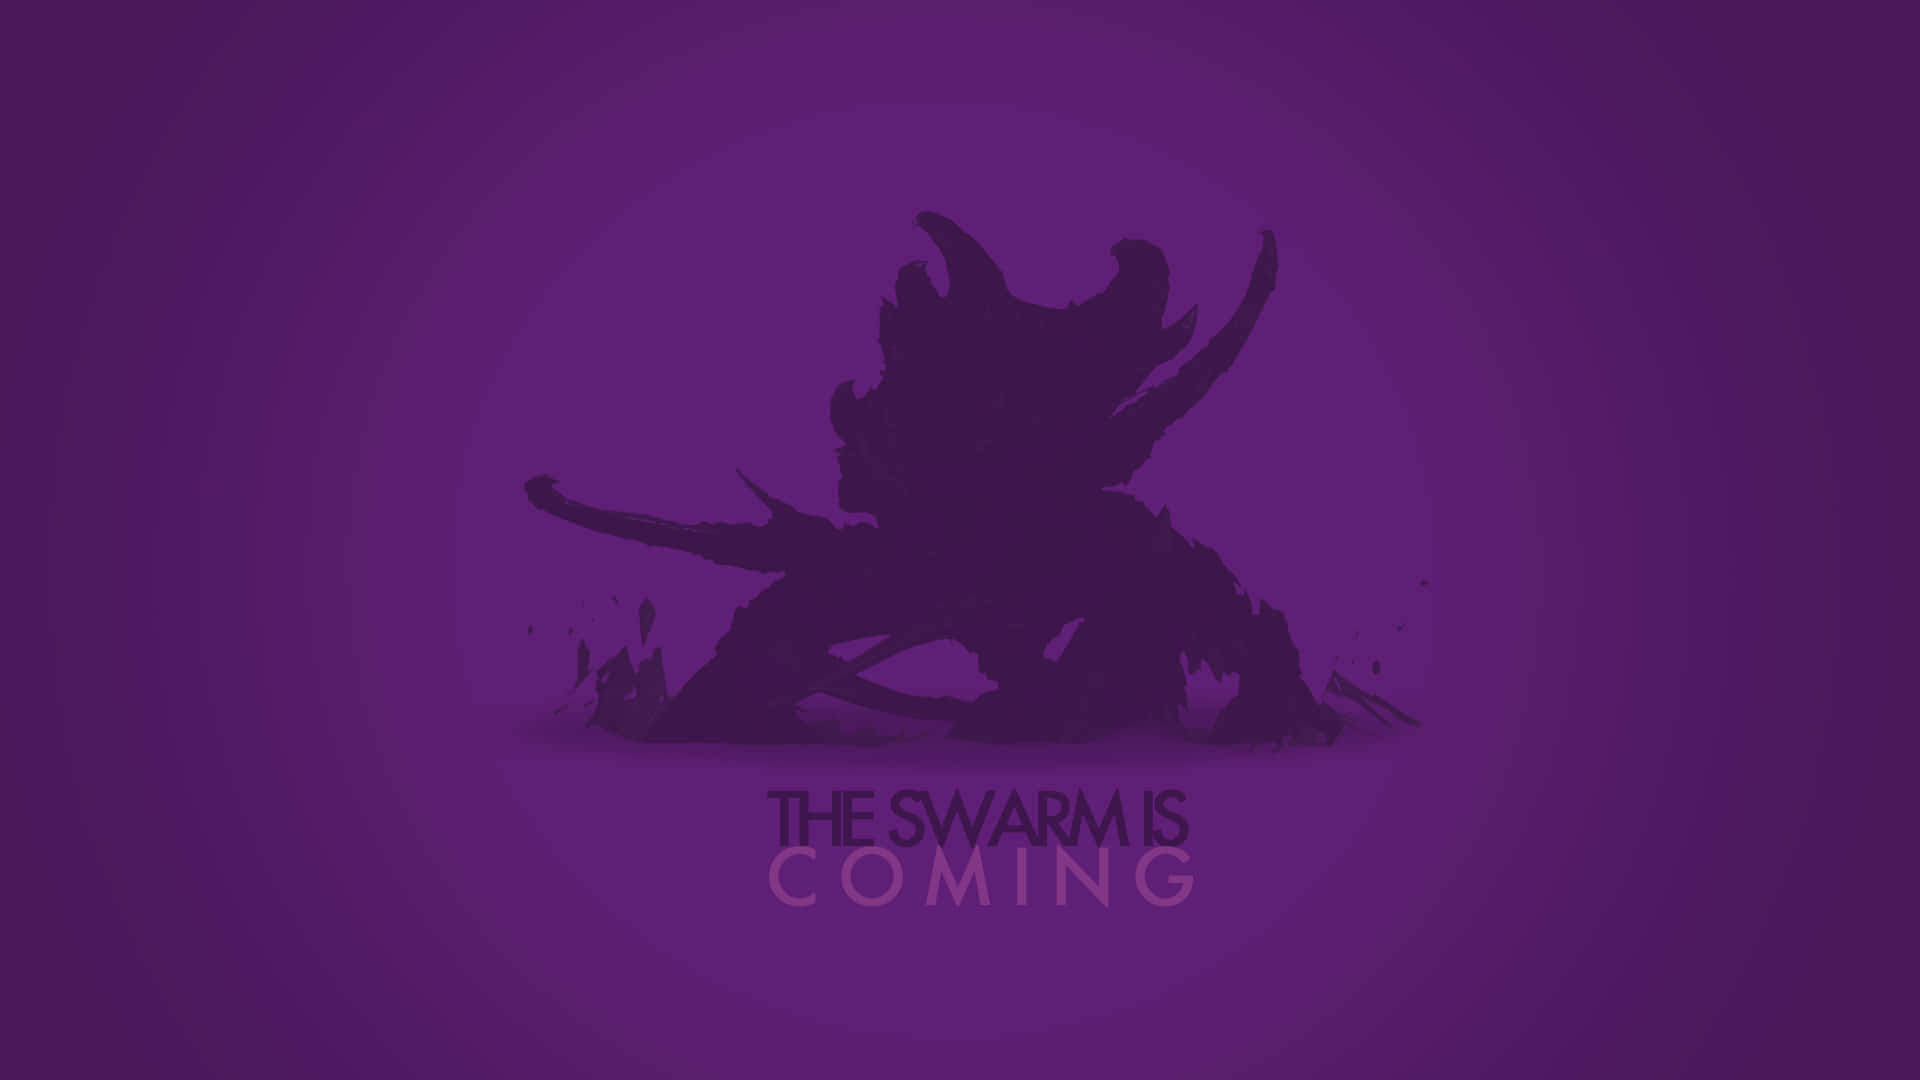 Join The Swarm!